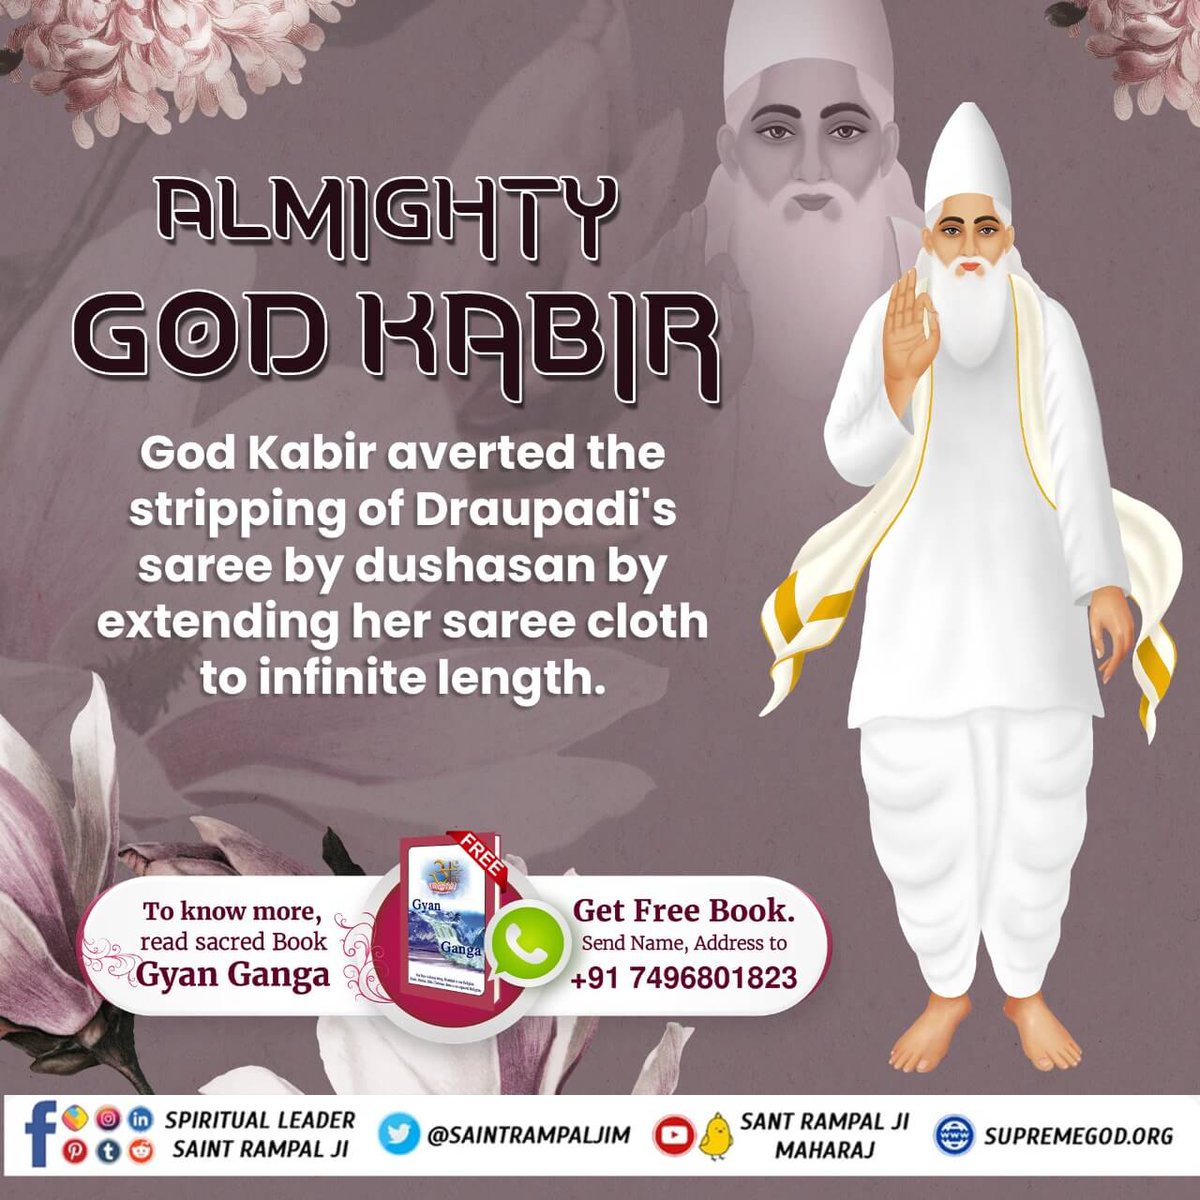 #GodKabir_Appears_In_4_Yugas
Almighty God Kabir
God Kabir averted the stripping of Draupadi's by extending her saree cloth to infinite length.